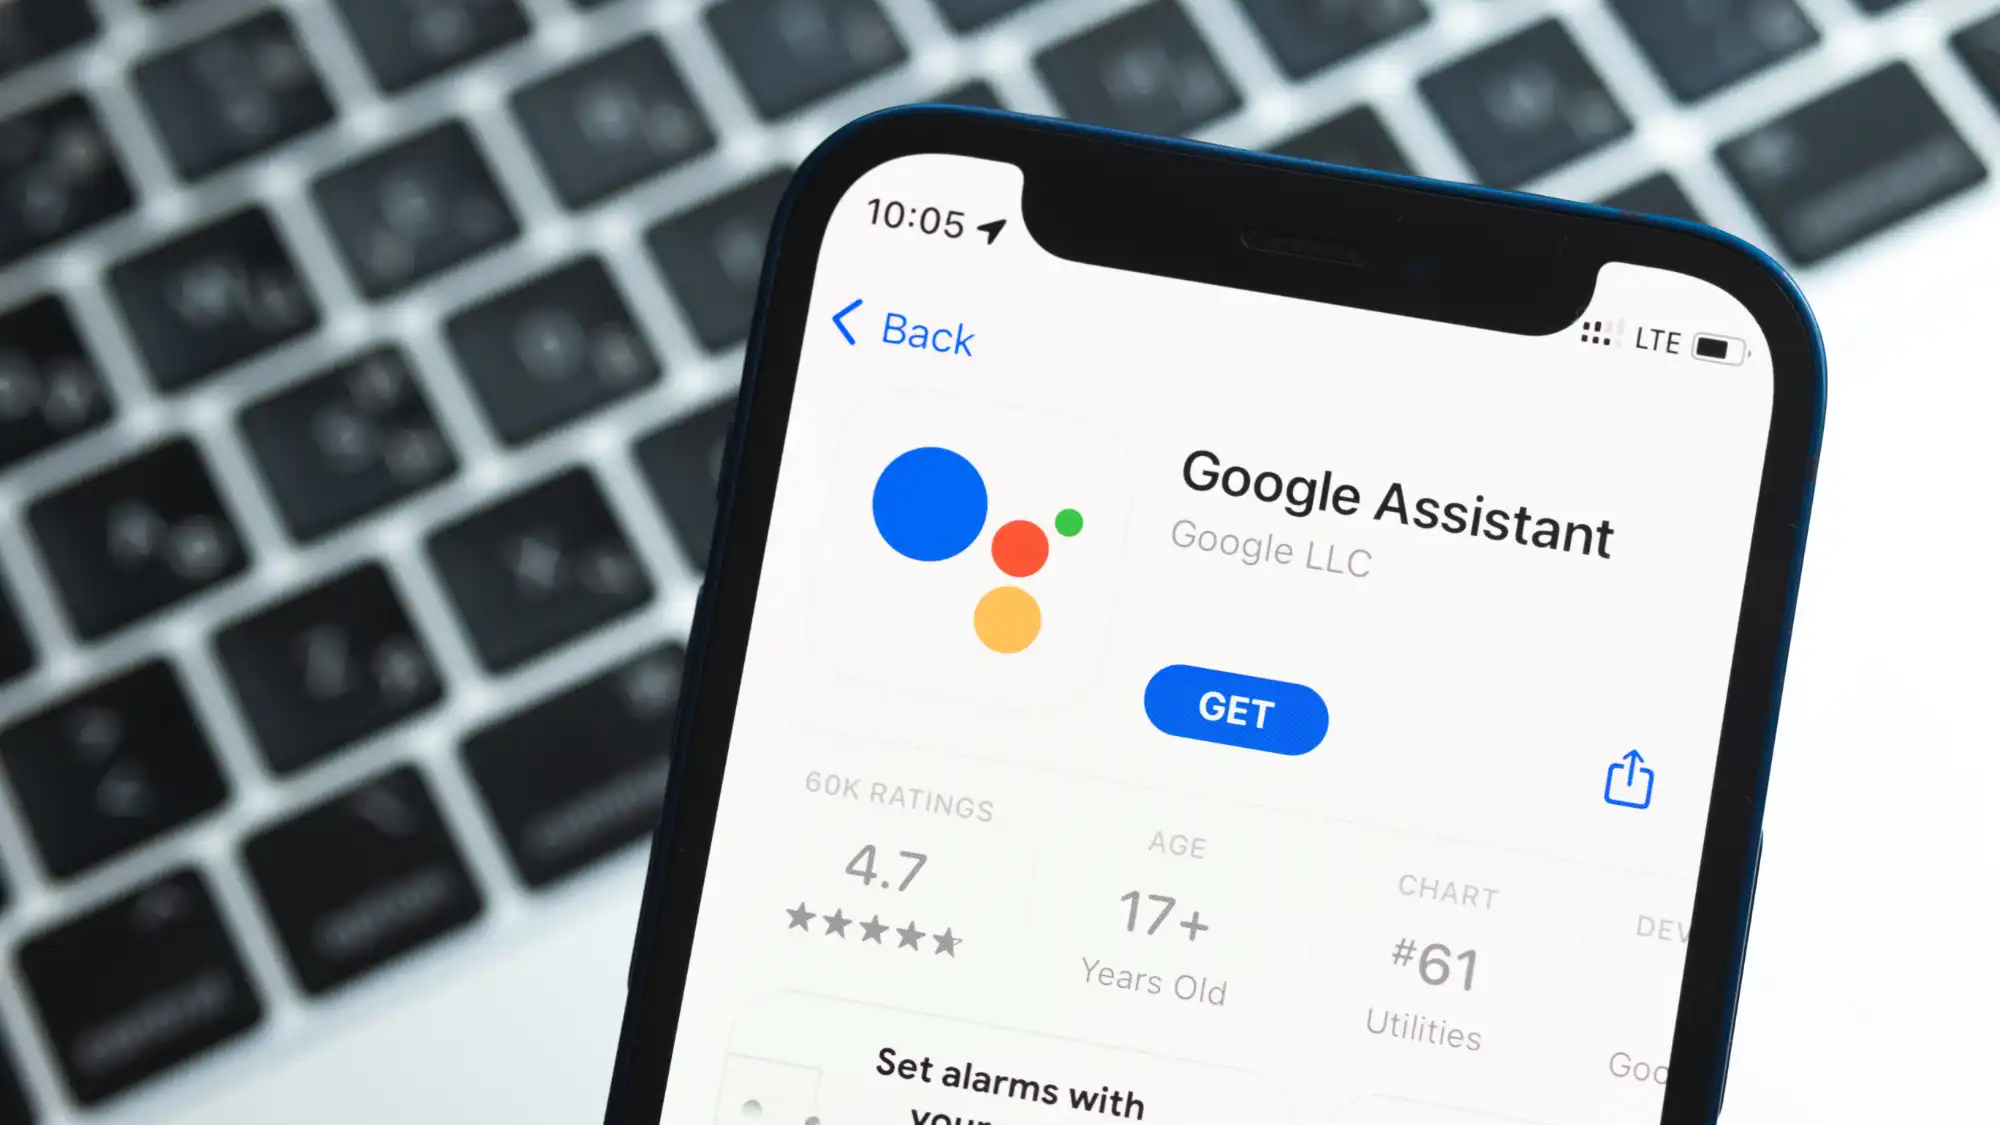 How to use Google Assistant to identify songs